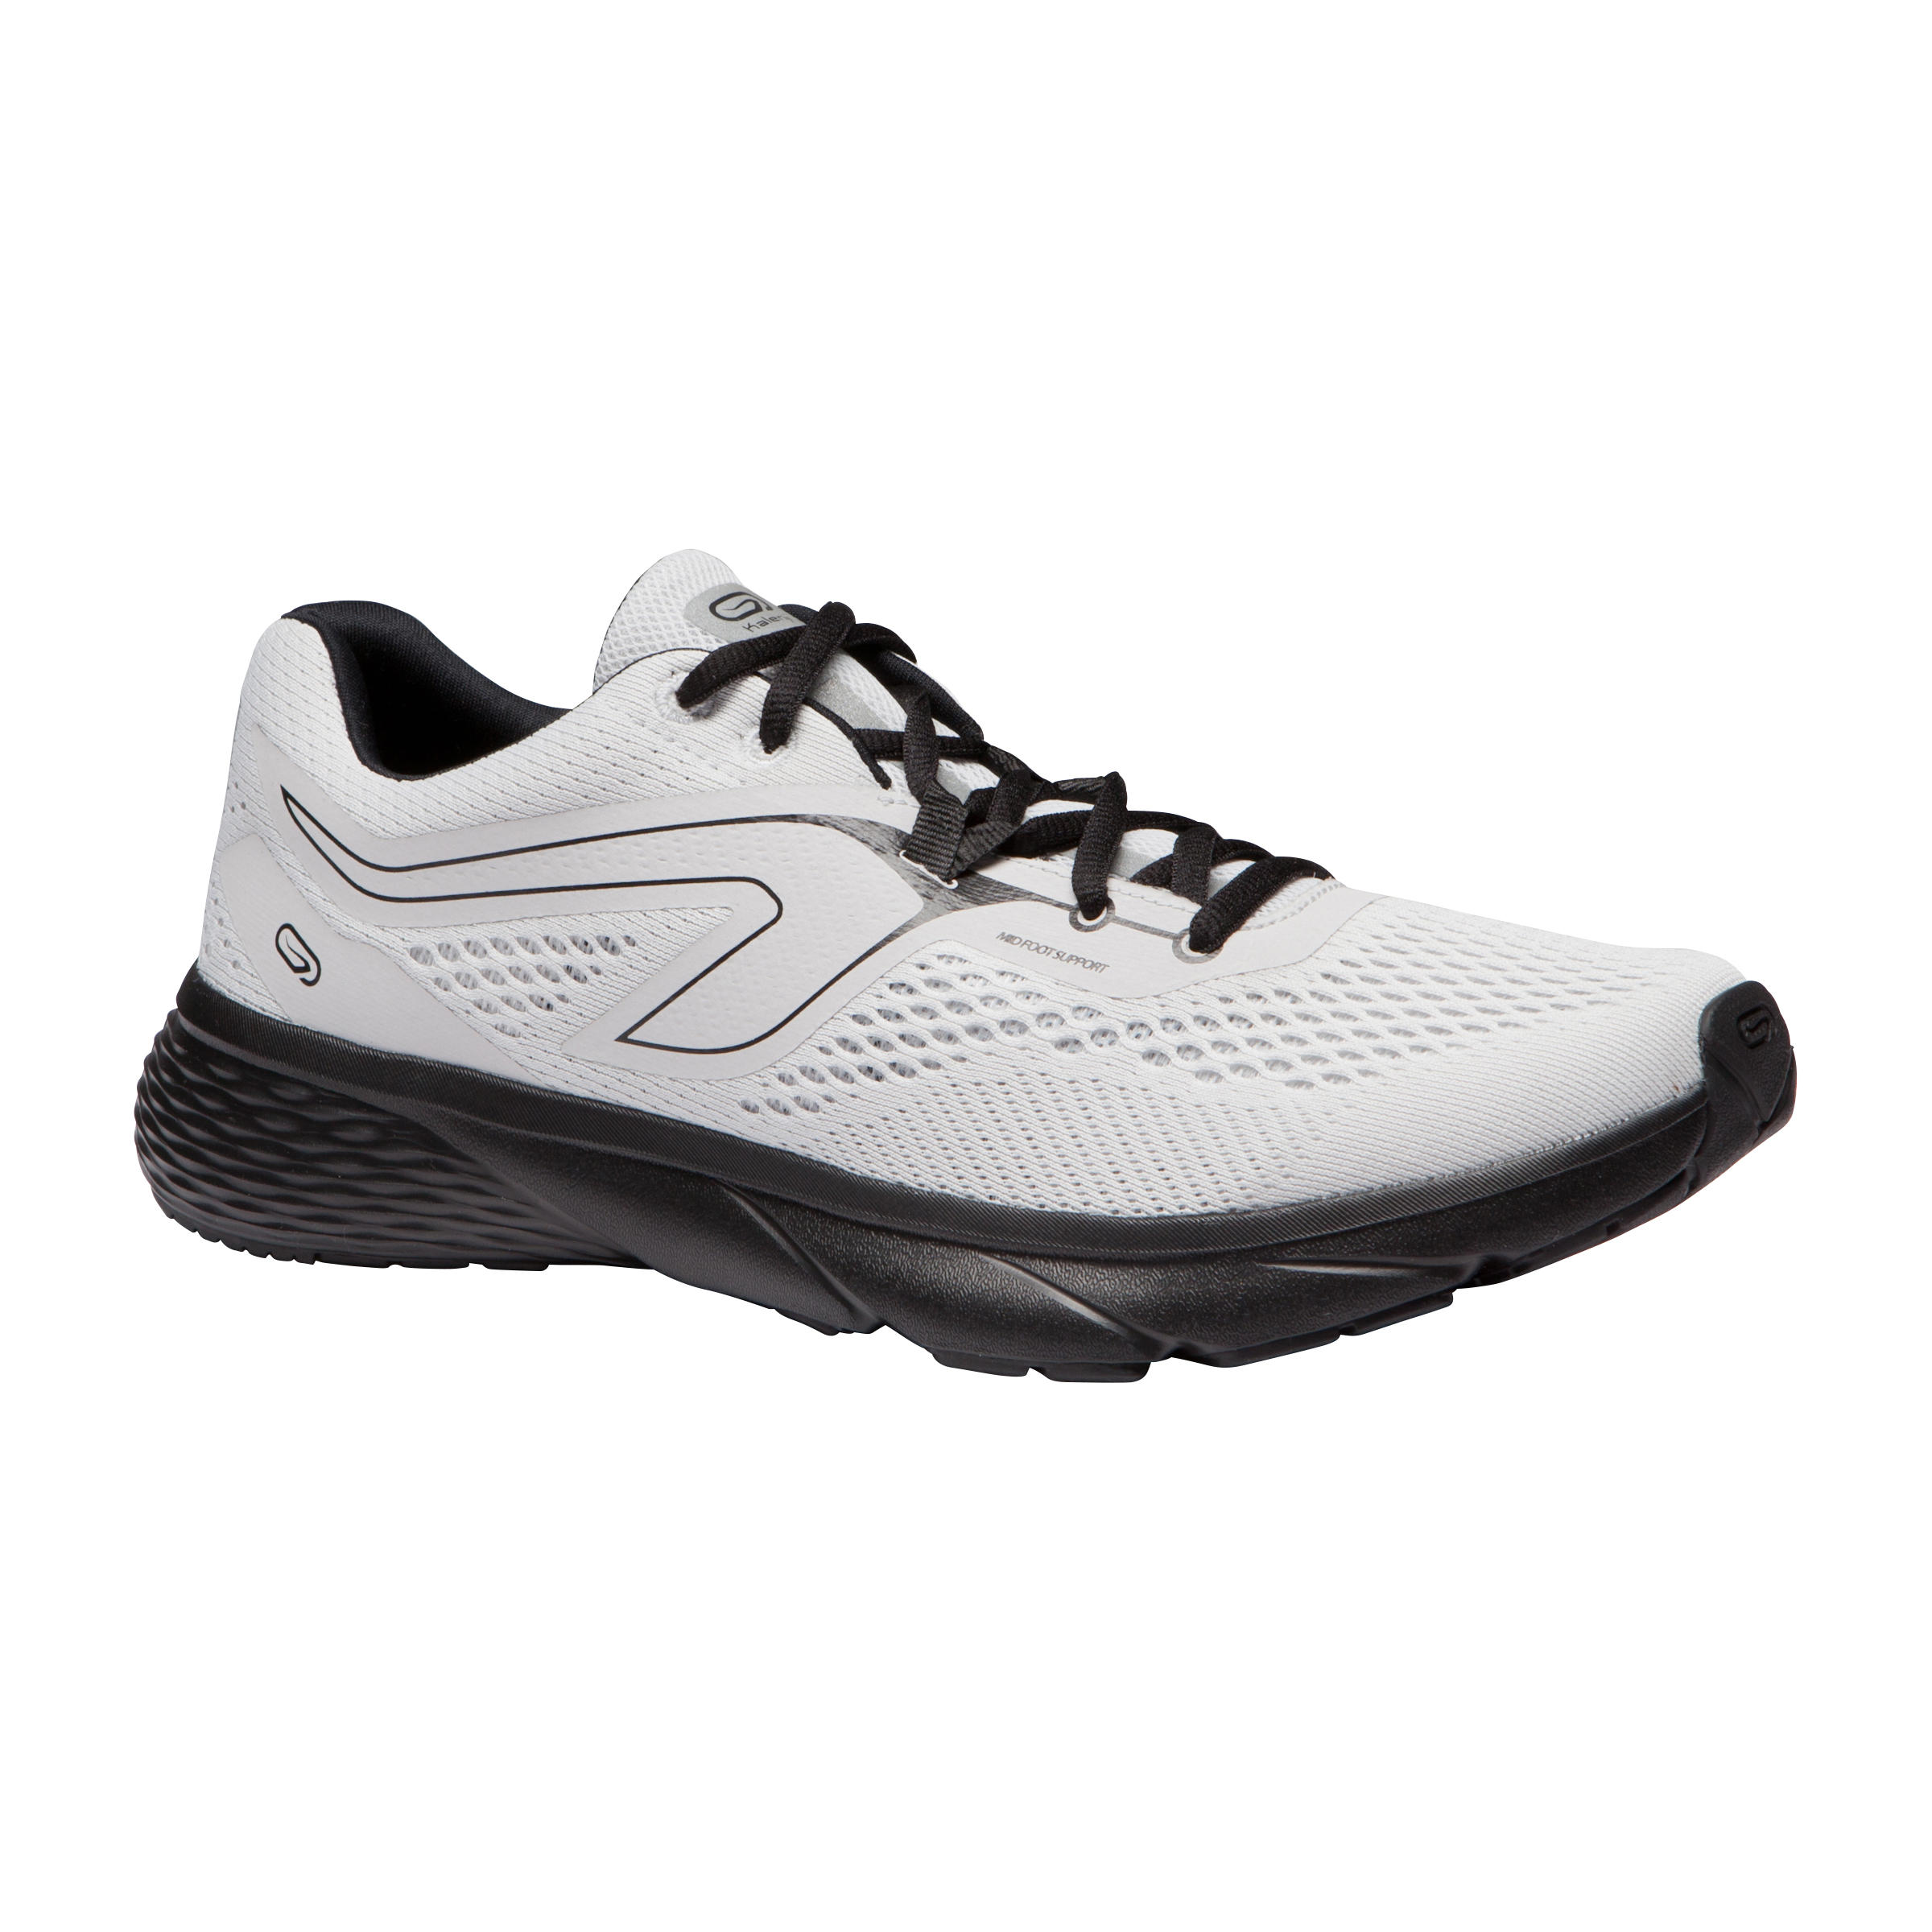 sports shoes in decathlon